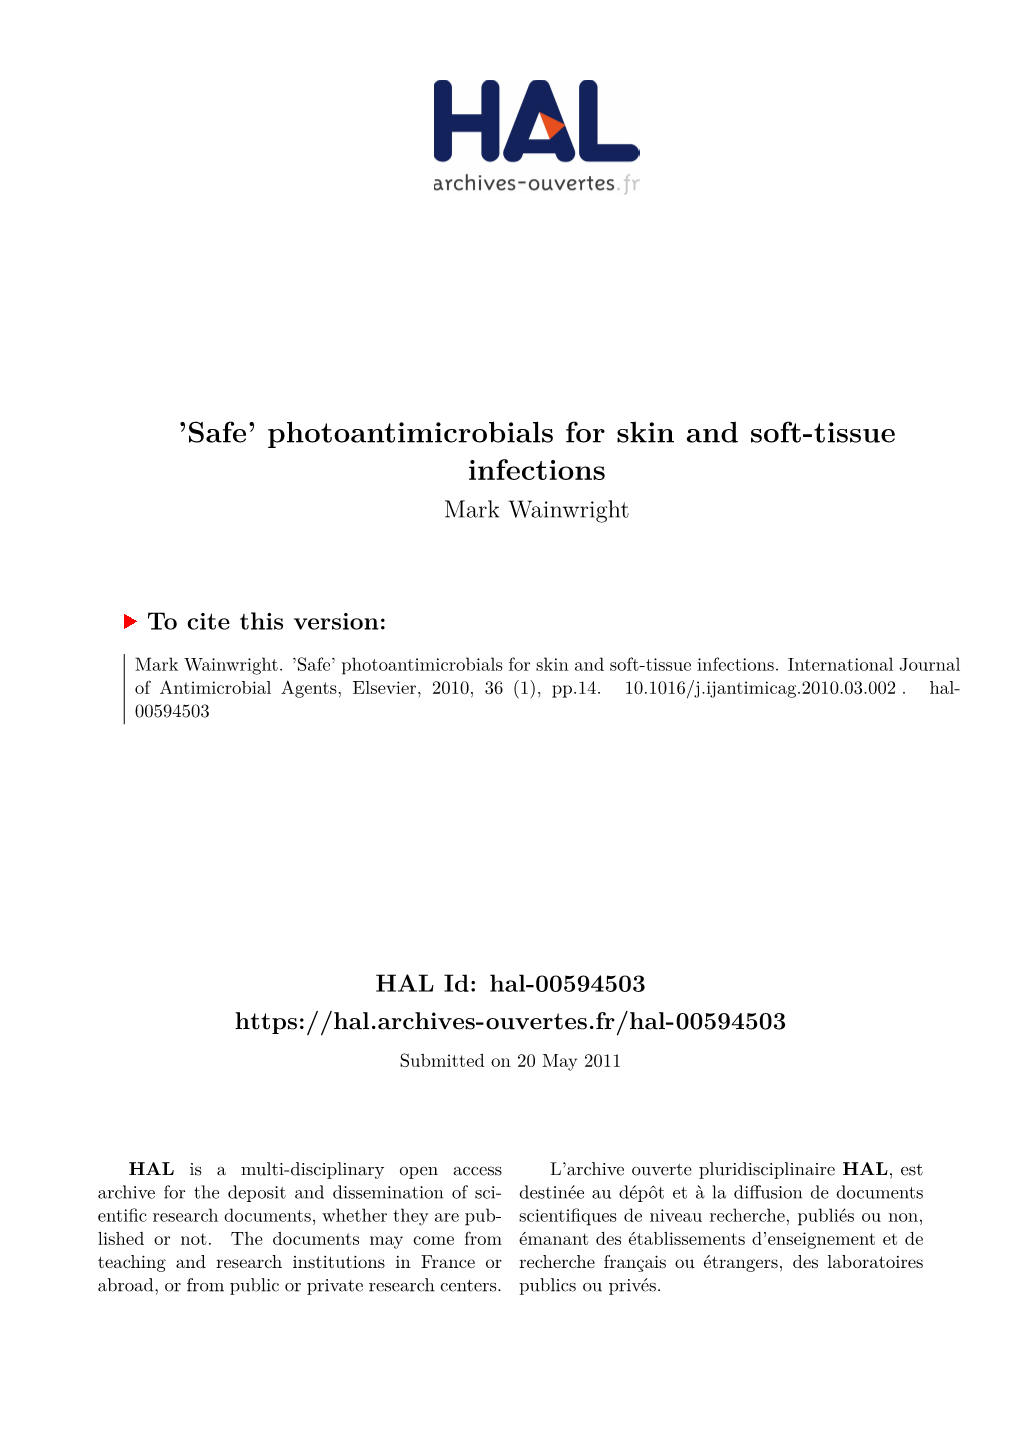 'Safe' Photoantimicrobials for Skin and Soft-Tissue Infections